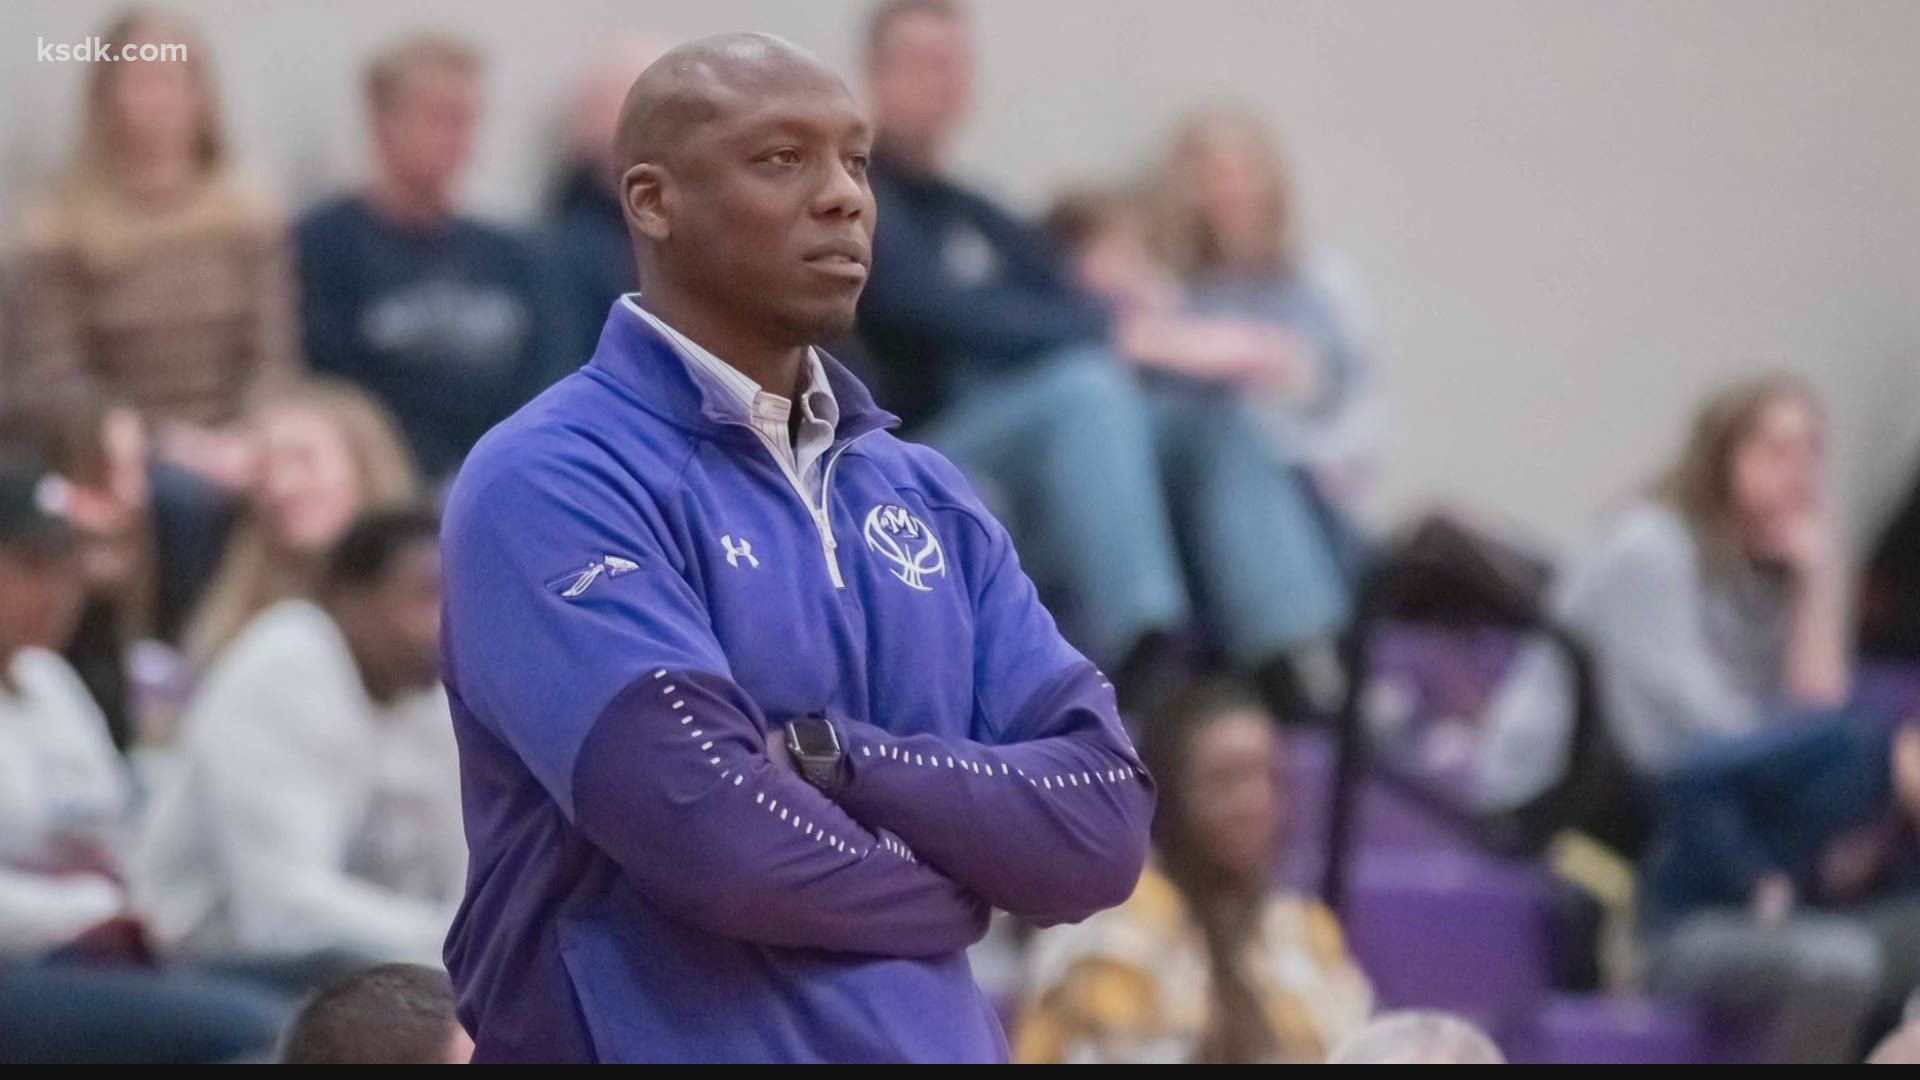 The Mascoutah Indians are off to an 11-1 start to their 2021 season. But they're playing on without the man who was supposed to lead them